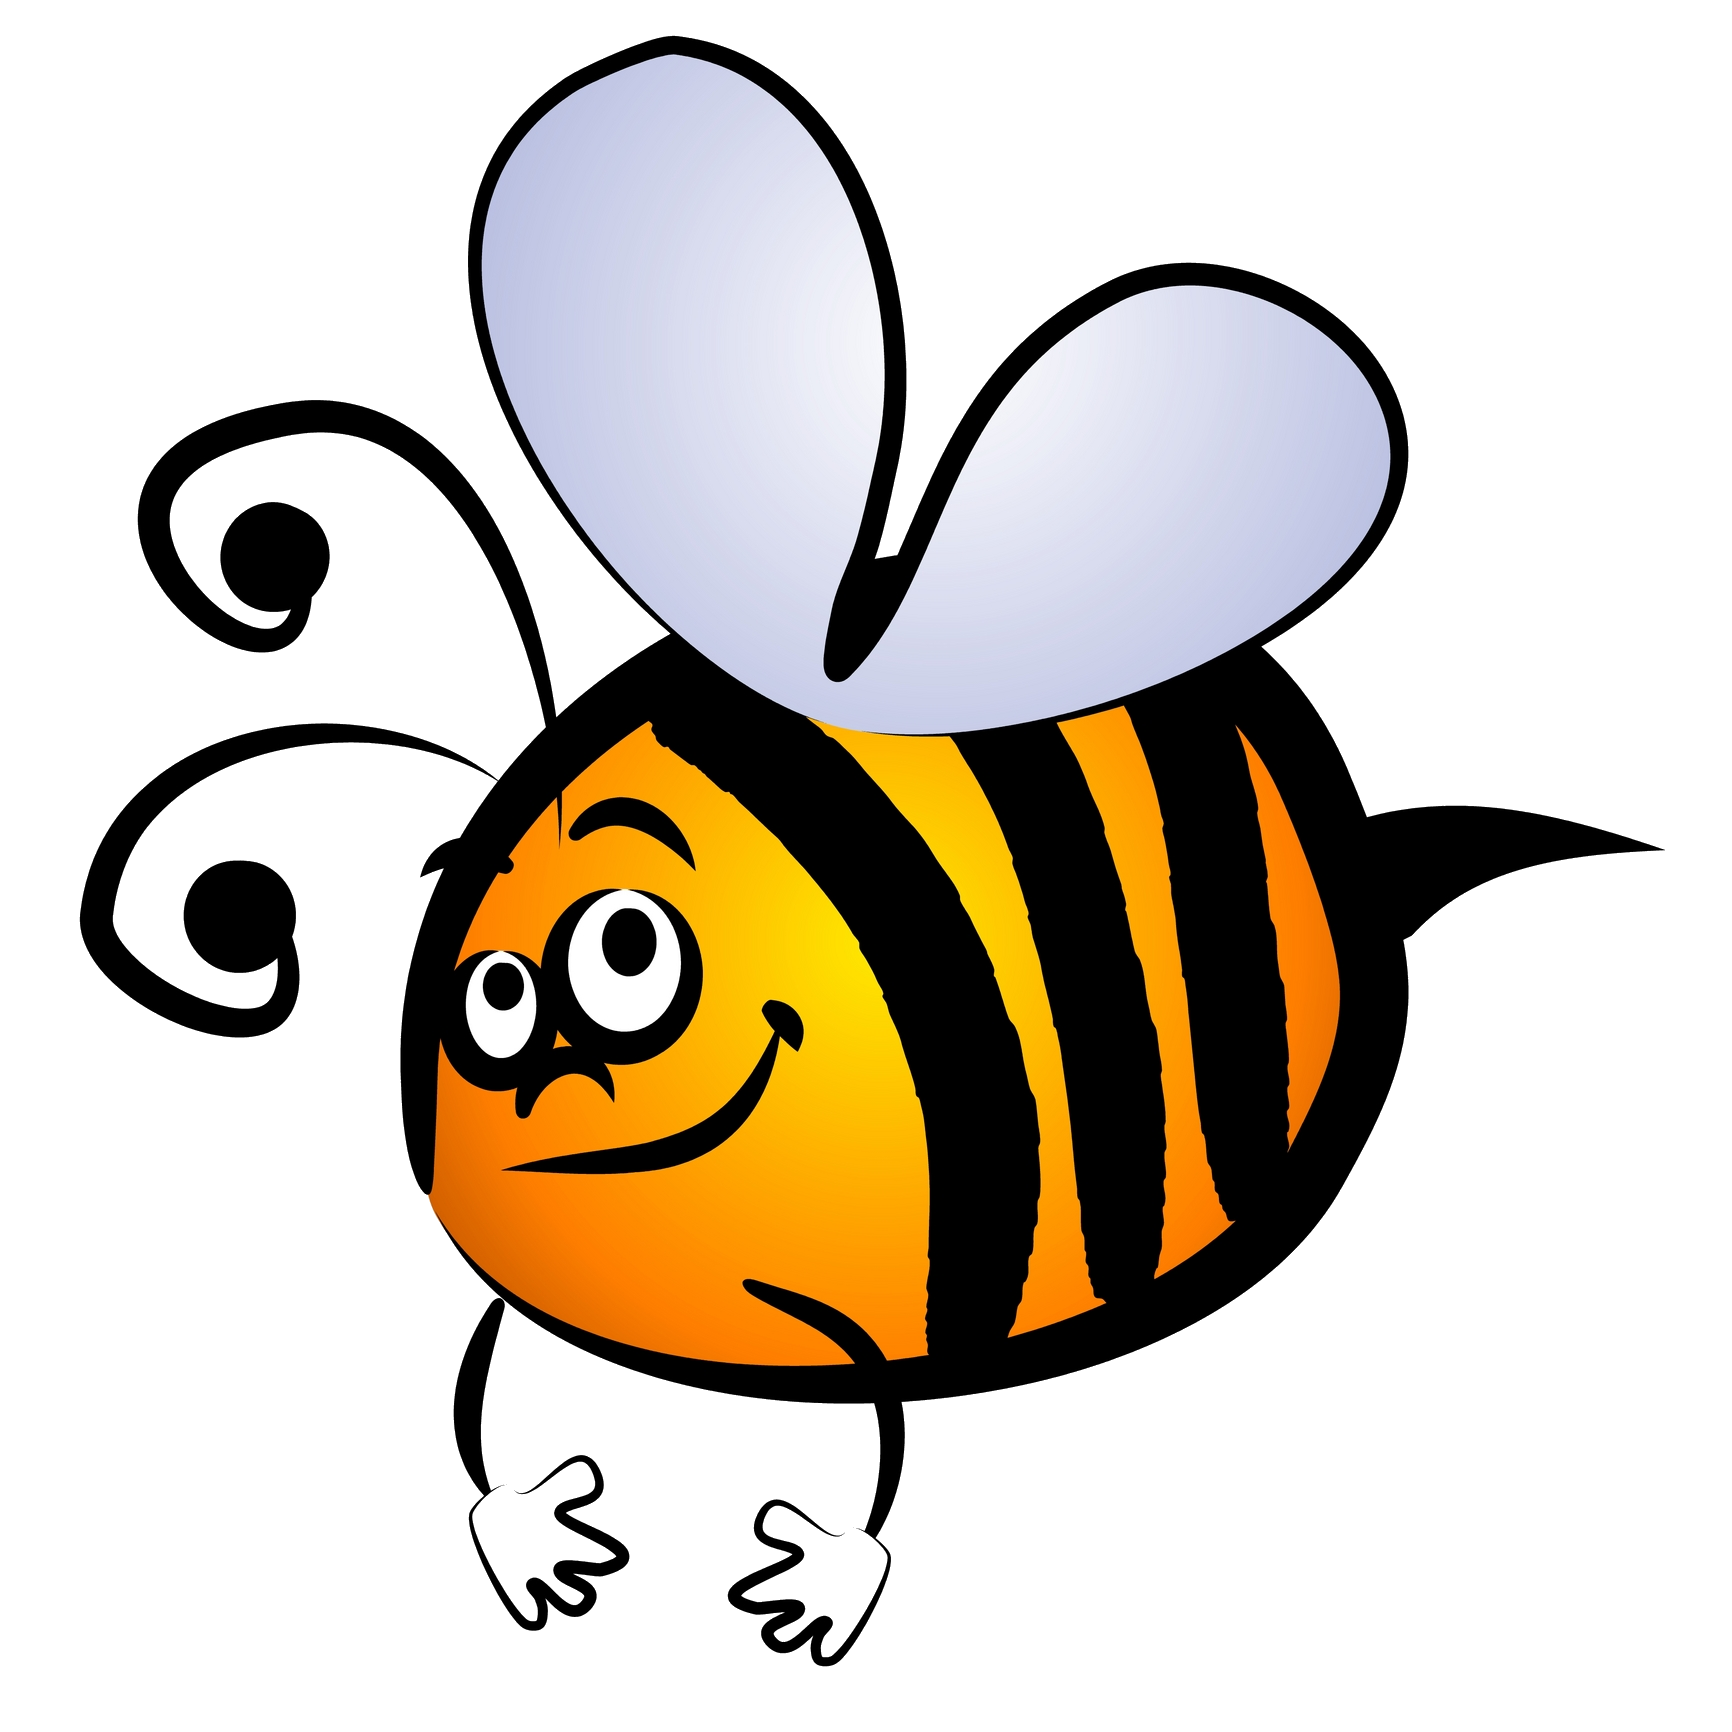 BUMBLe-Bee-background-trans1 | thebumblebees.